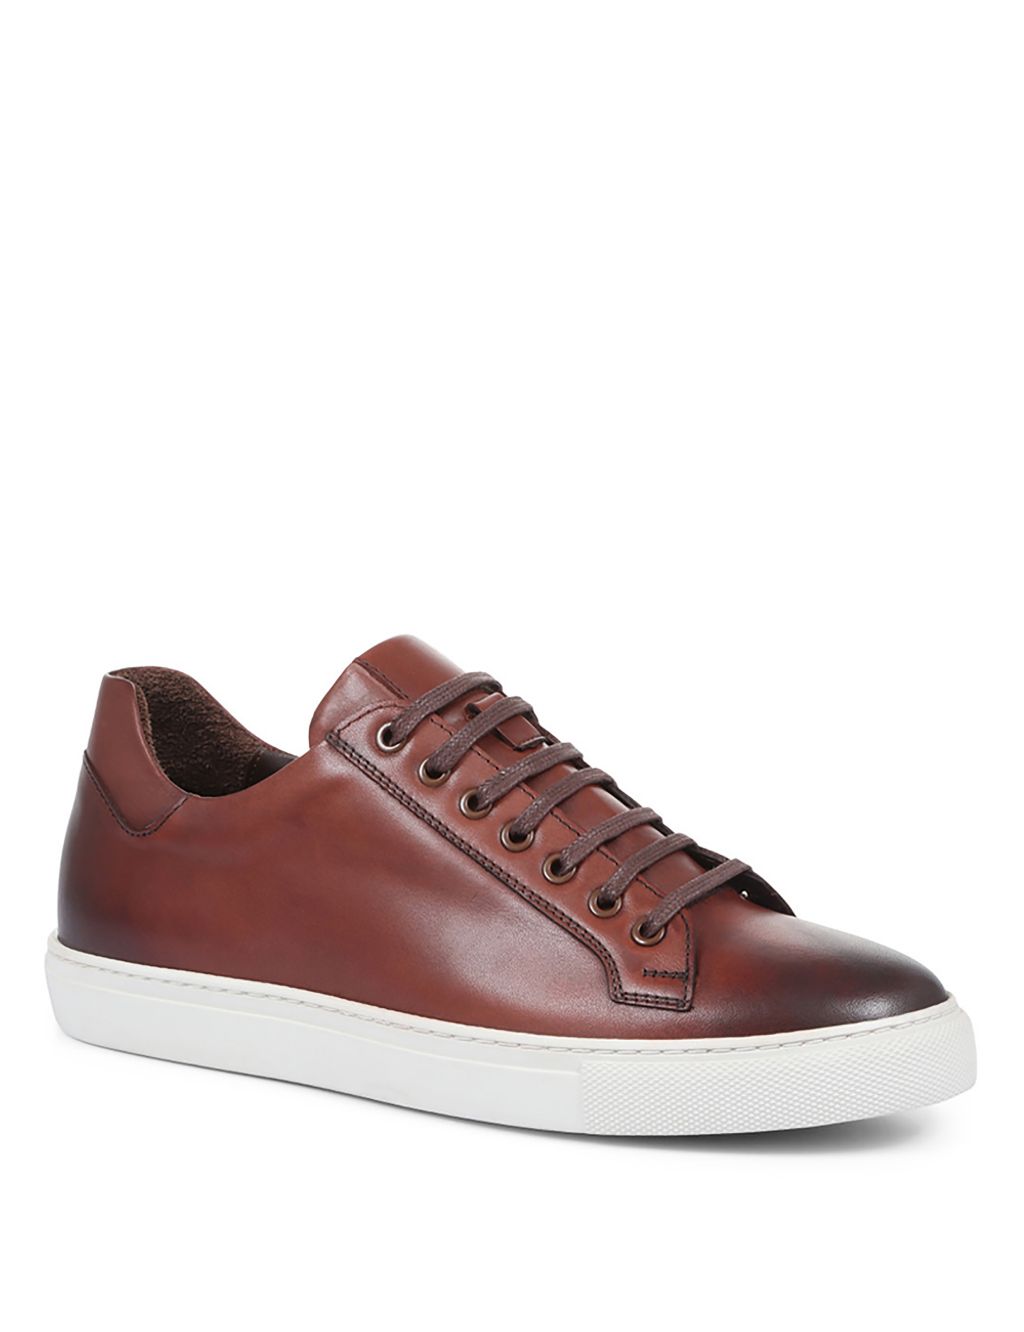 Leather Lace-Up Trainers image 2